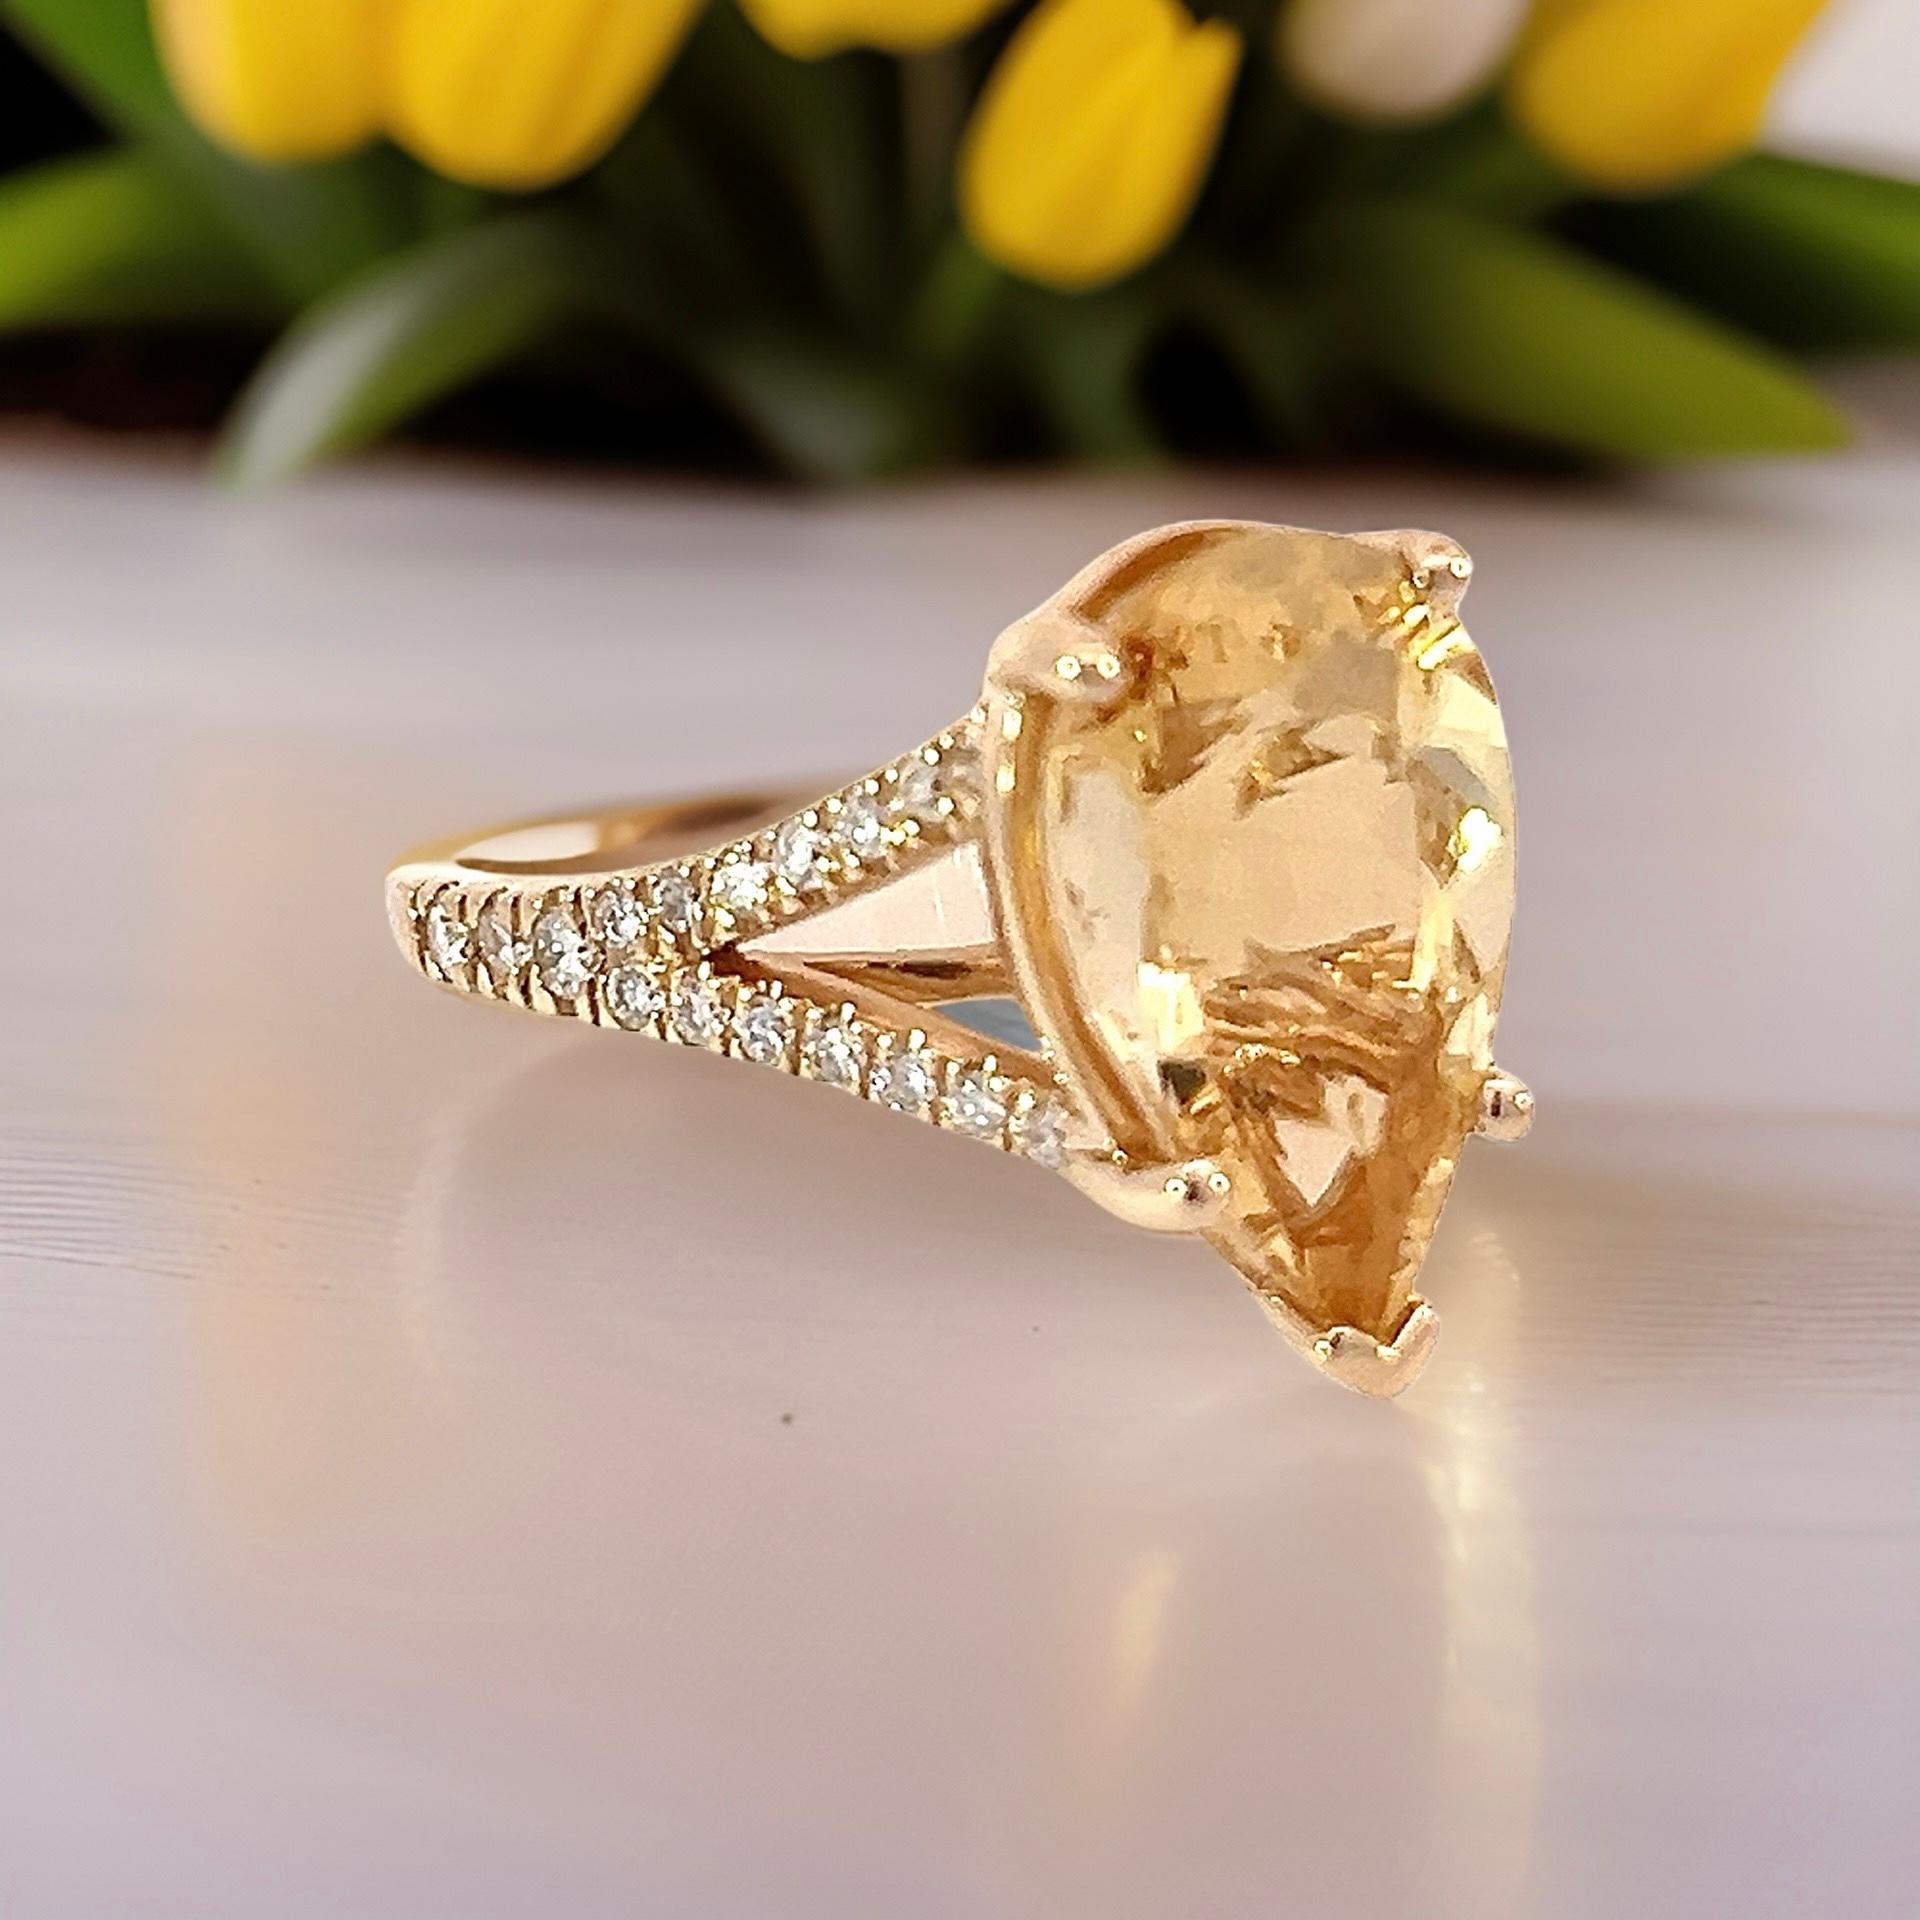 Natural Citrine Diamond Ring 6.5 14k Y Gold 4.79 TCW Certified For Sale 12